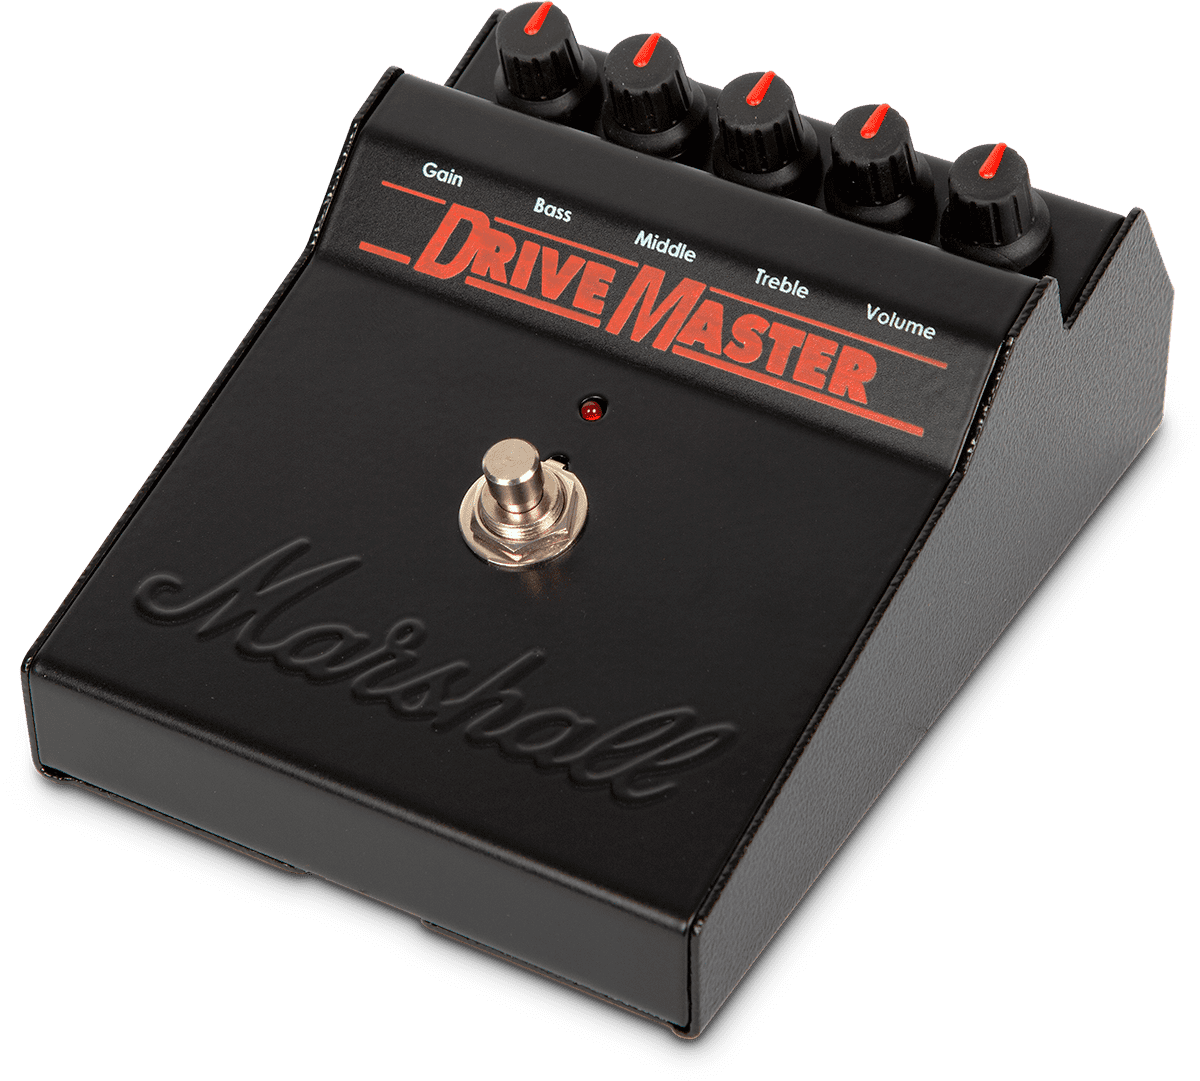 Marshall Drivemaster 60th Anniversary - PÉdale Overdrive / Distortion / Fuzz - Variation 3